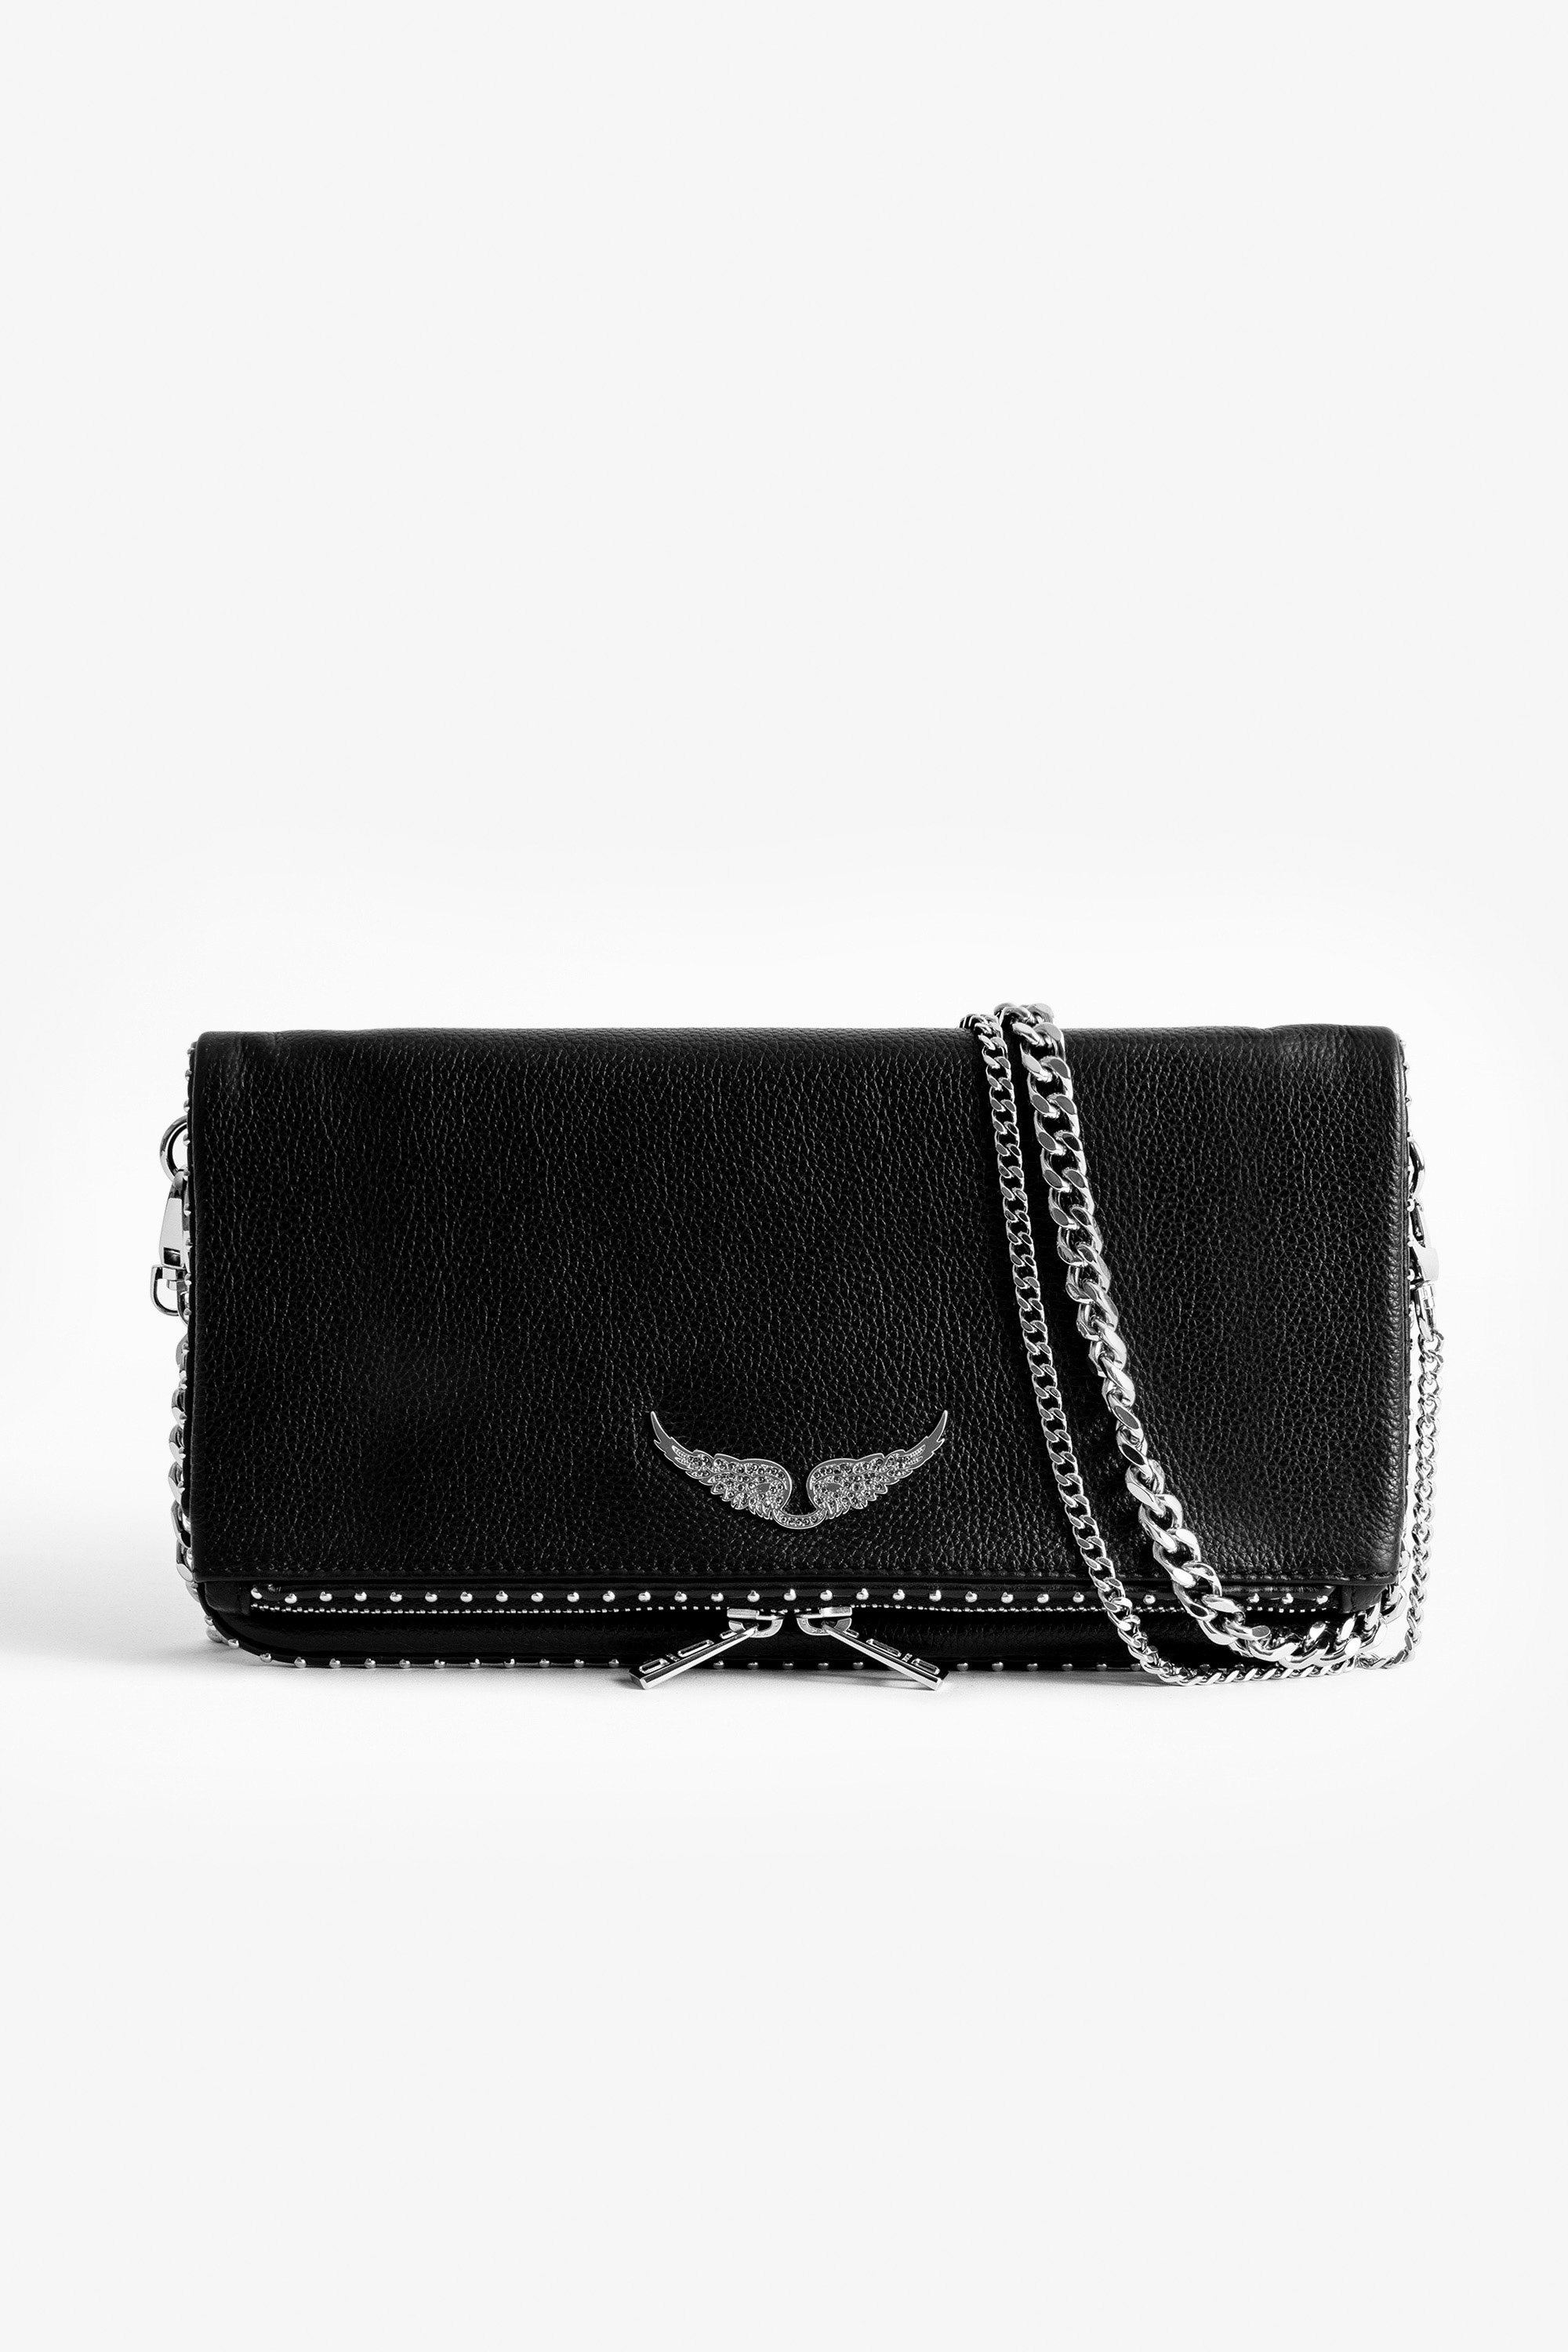 Rock Studs クラッチバッグ - Women's black clutch in leather, embellished with studs.